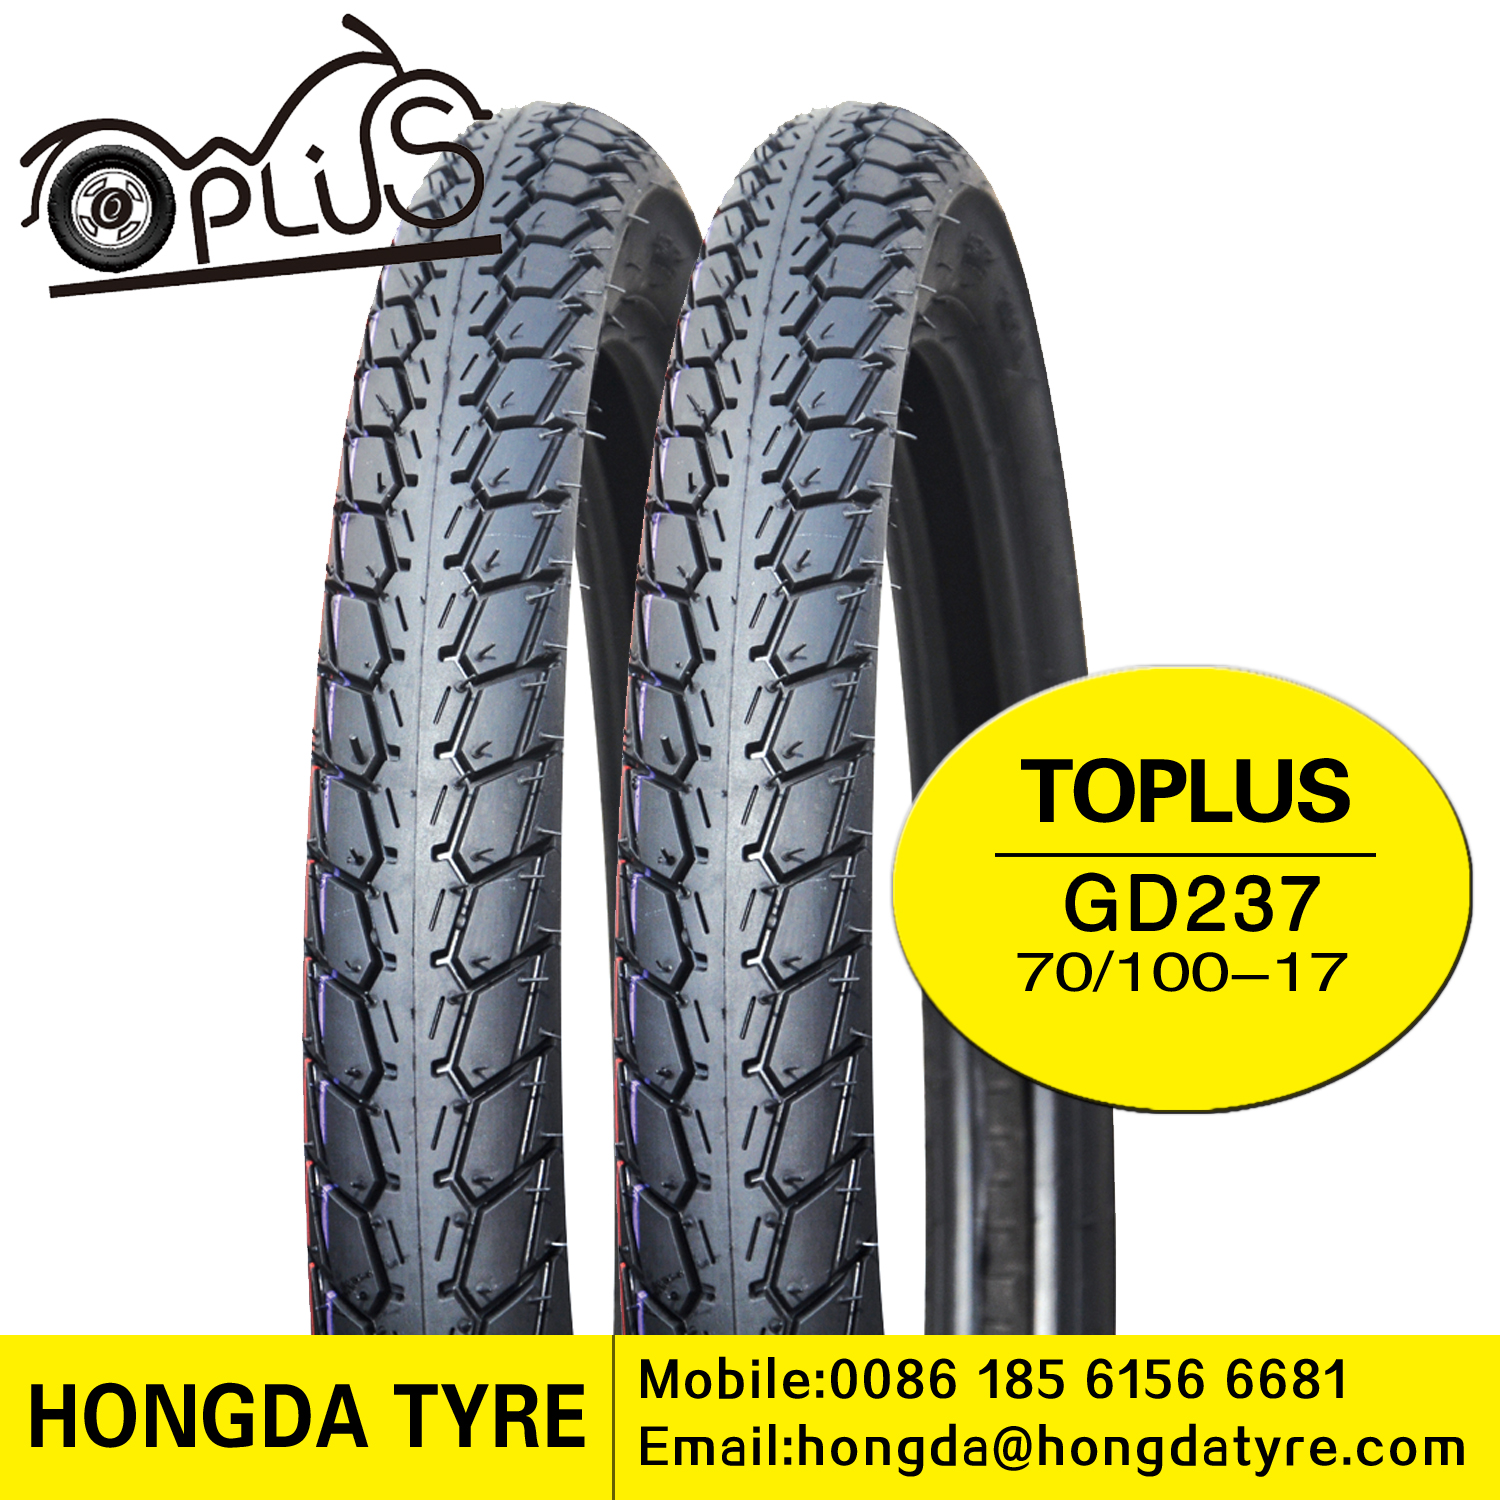 Motorcycle tyre GD237